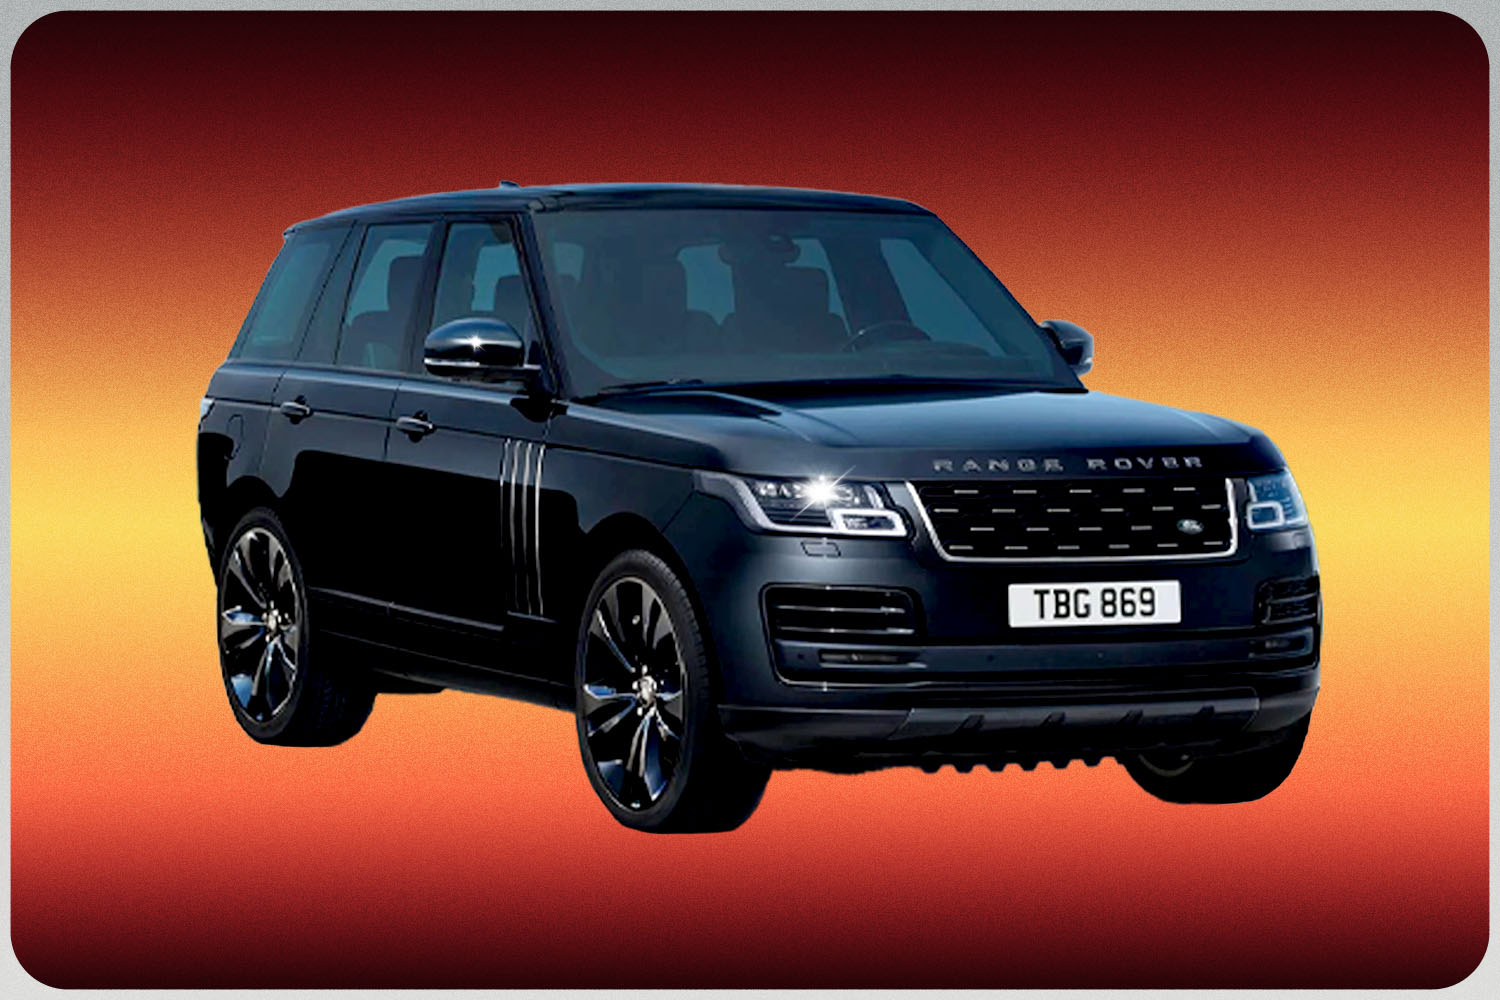 Our Pick for Best Old-School Flagship Luxury SUV: 2021 Land Rover Range Rover in Dark Blue